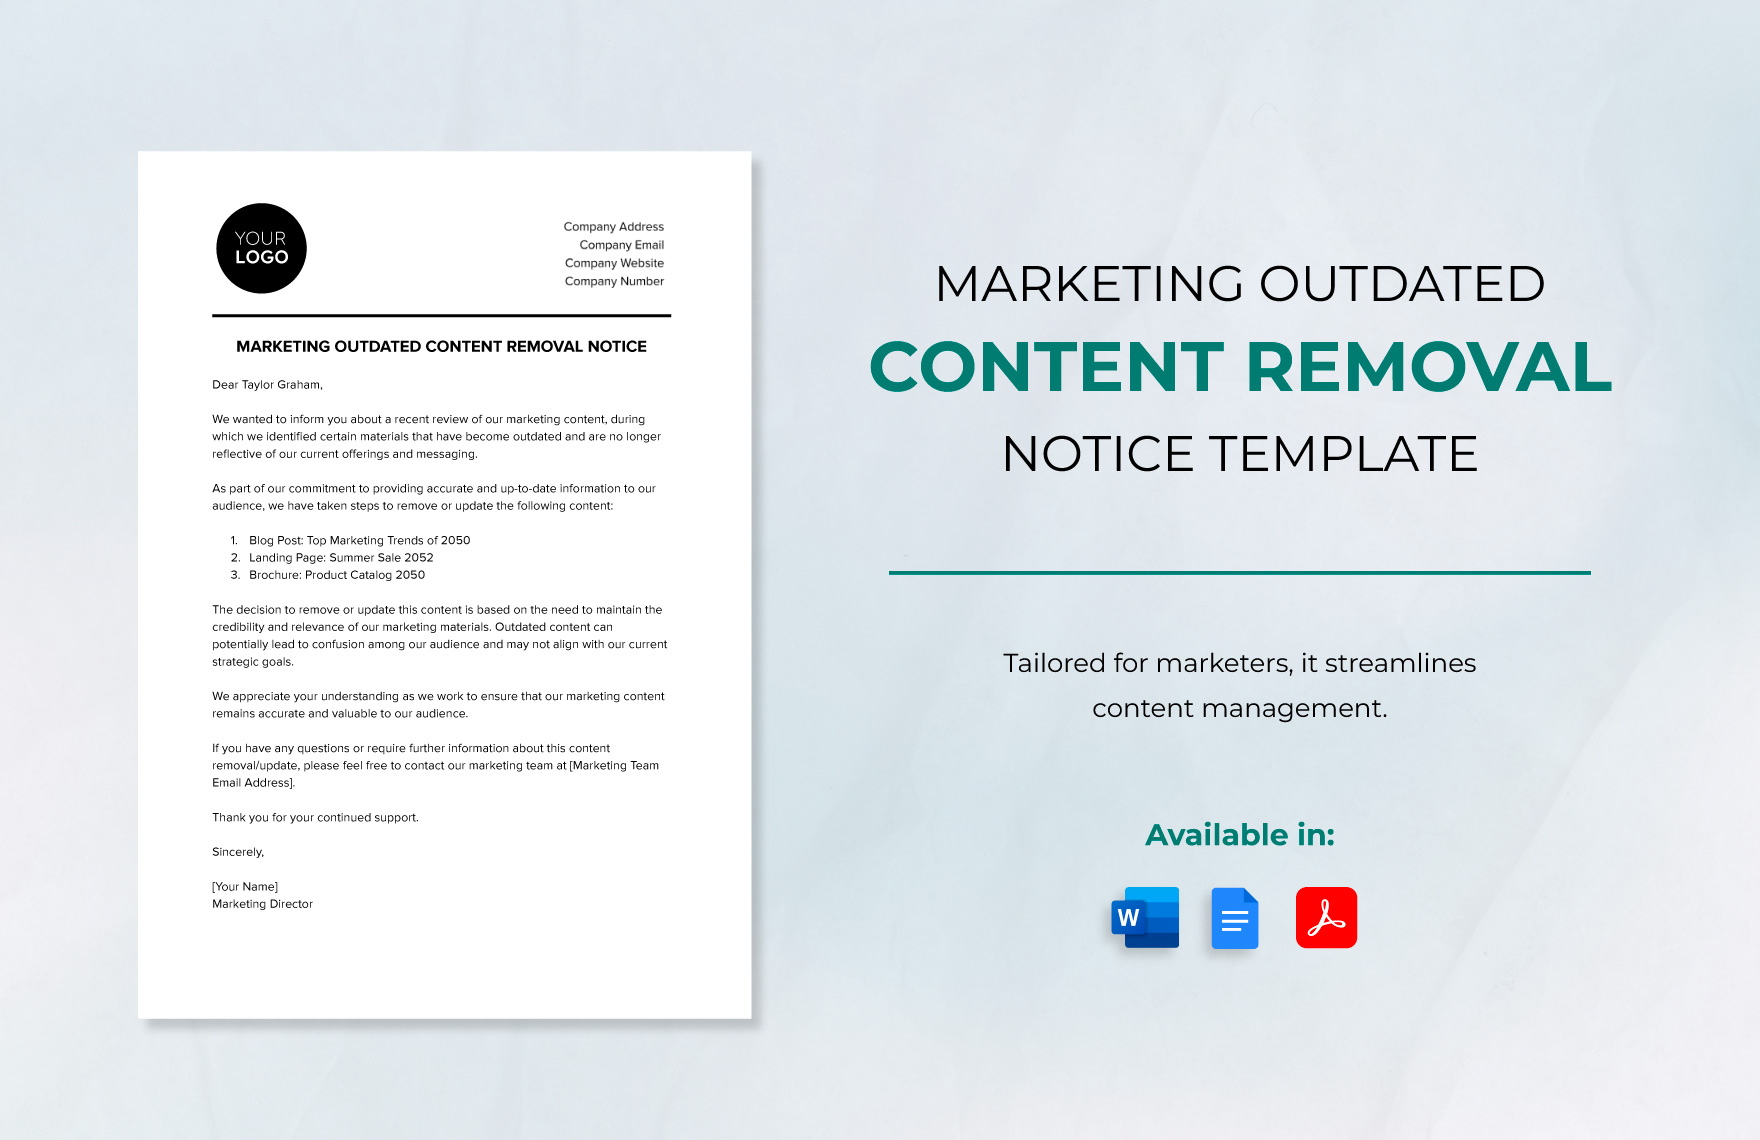 Marketing Outdated Content Removal Notice Template in Word, Google Docs, PDF